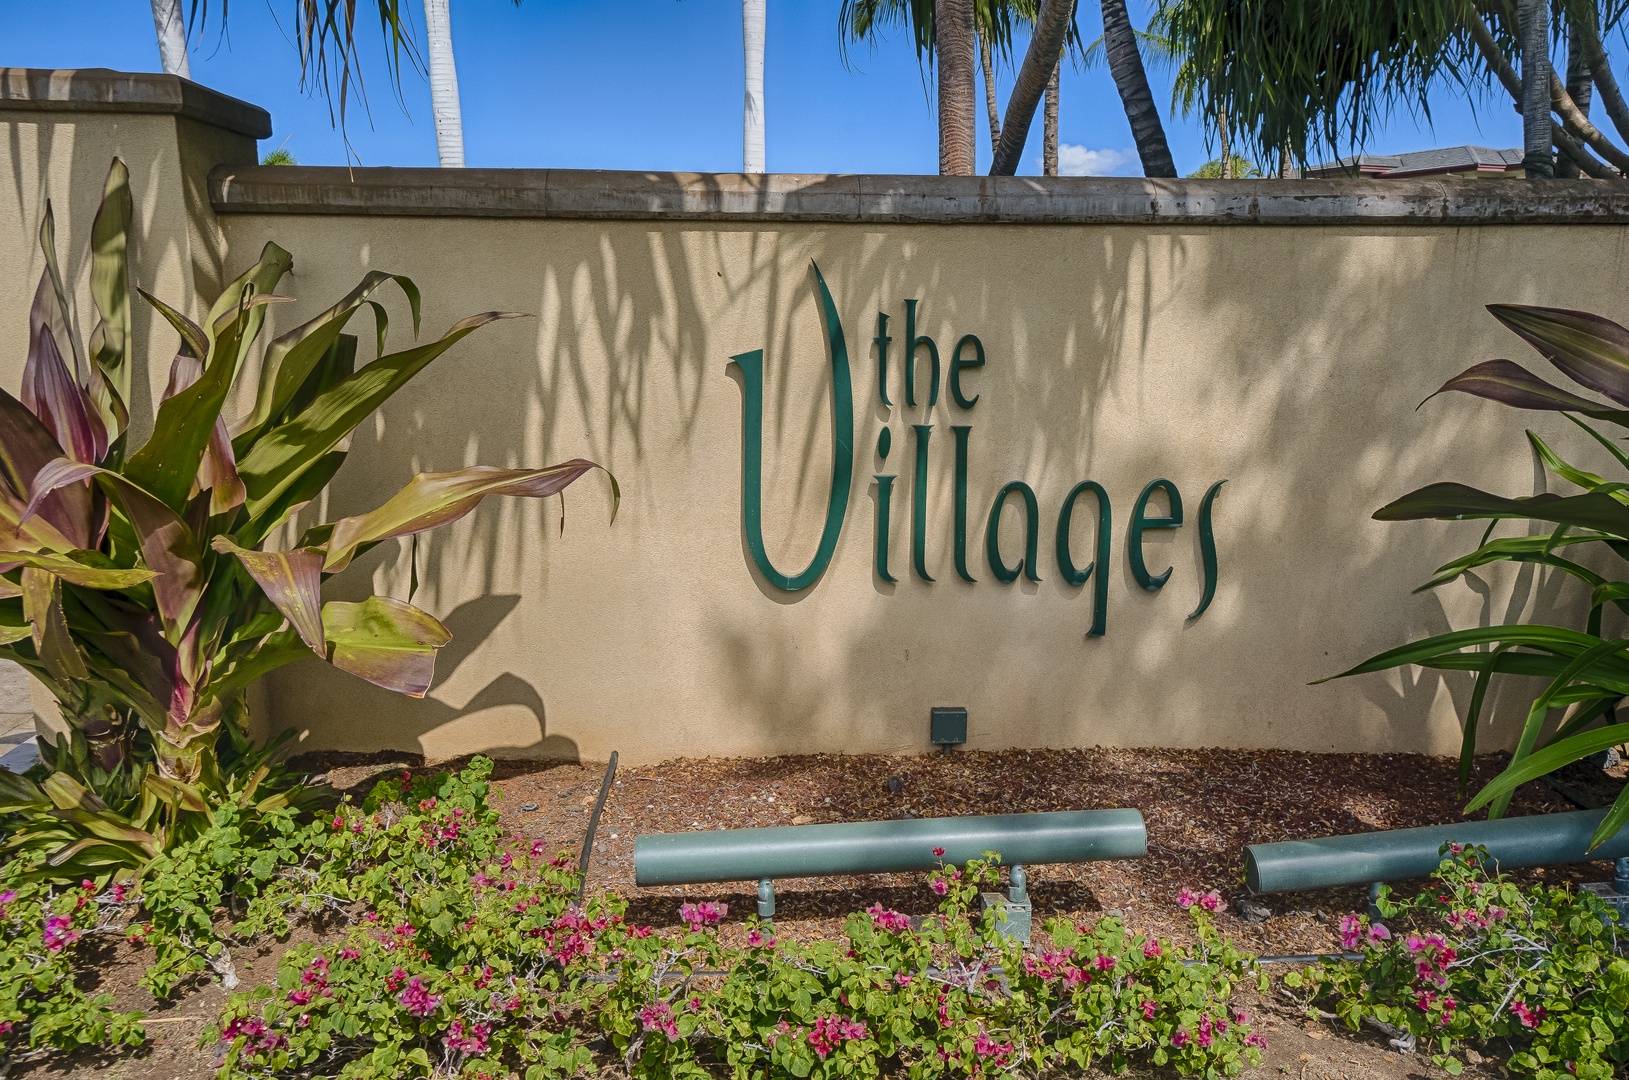 Kamuela Vacation Rentals, Villages at Mauna Lani Resort Unit # 728 - VILLAGES #28 WITH OVER 30 5-STAR REVIEWS FOR THIS HOME